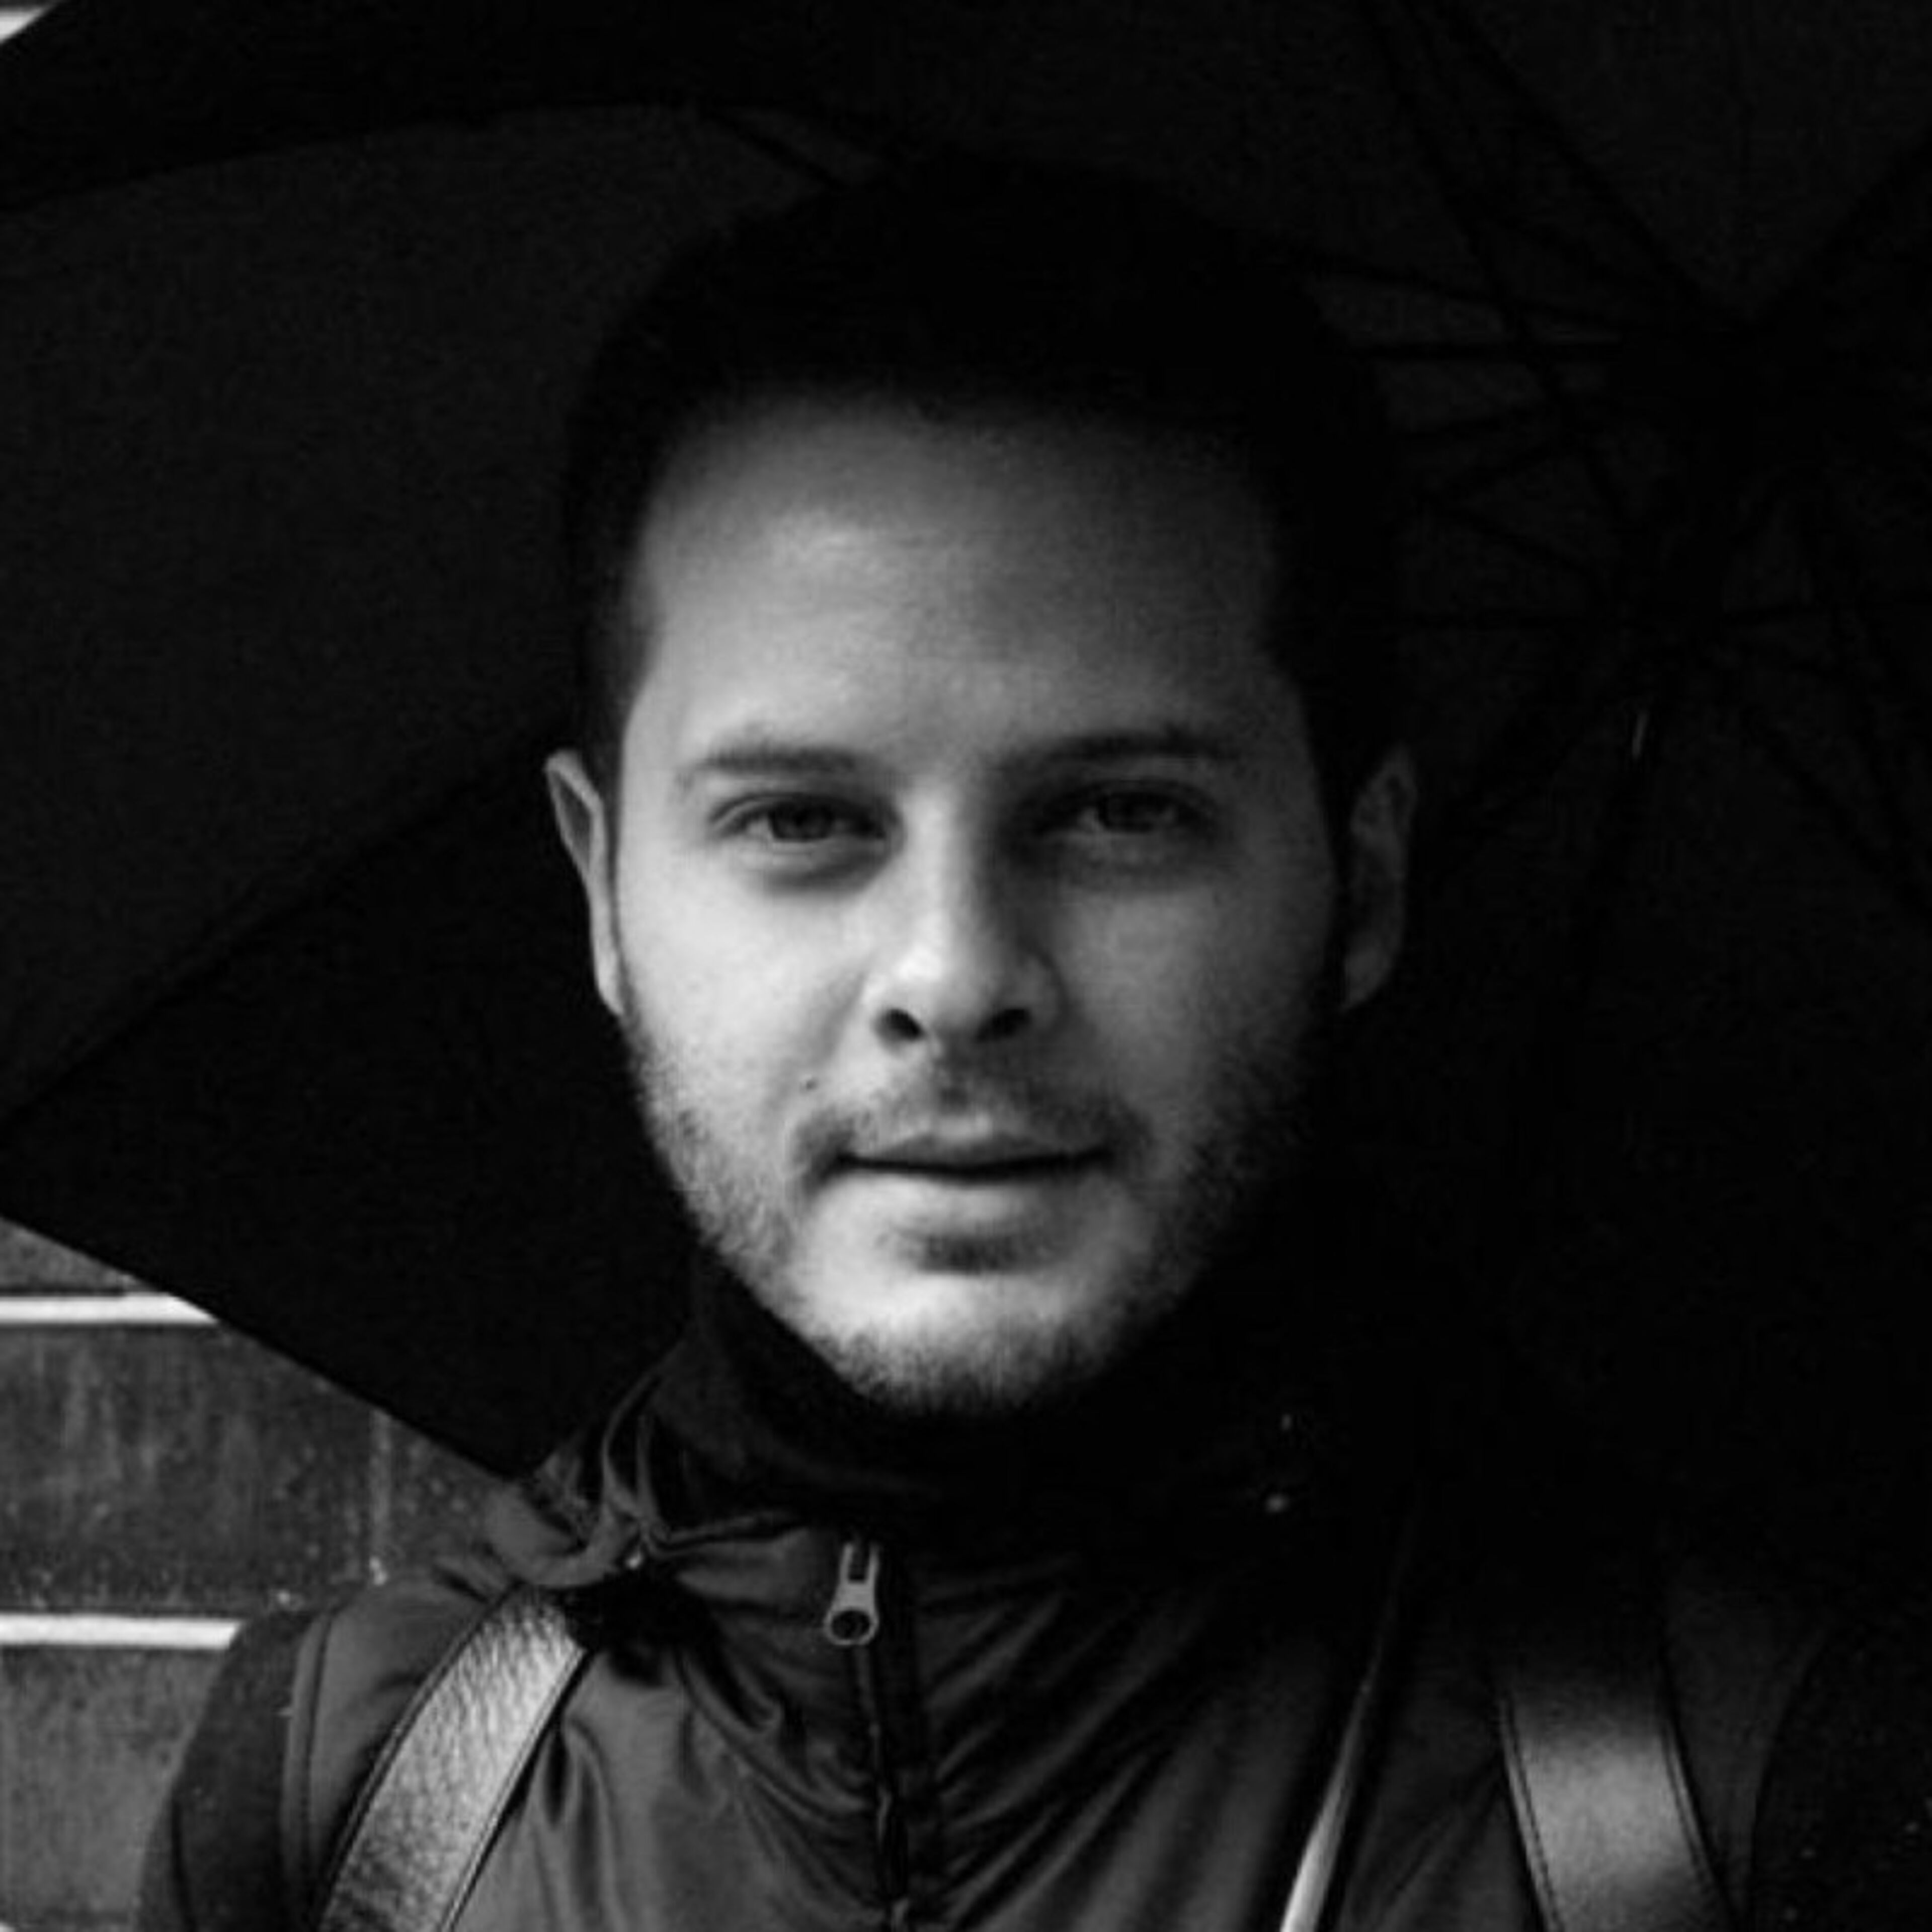 A monochrome portrait of a man holding an umbrella, gazing directly at the camera with a subtle smile.